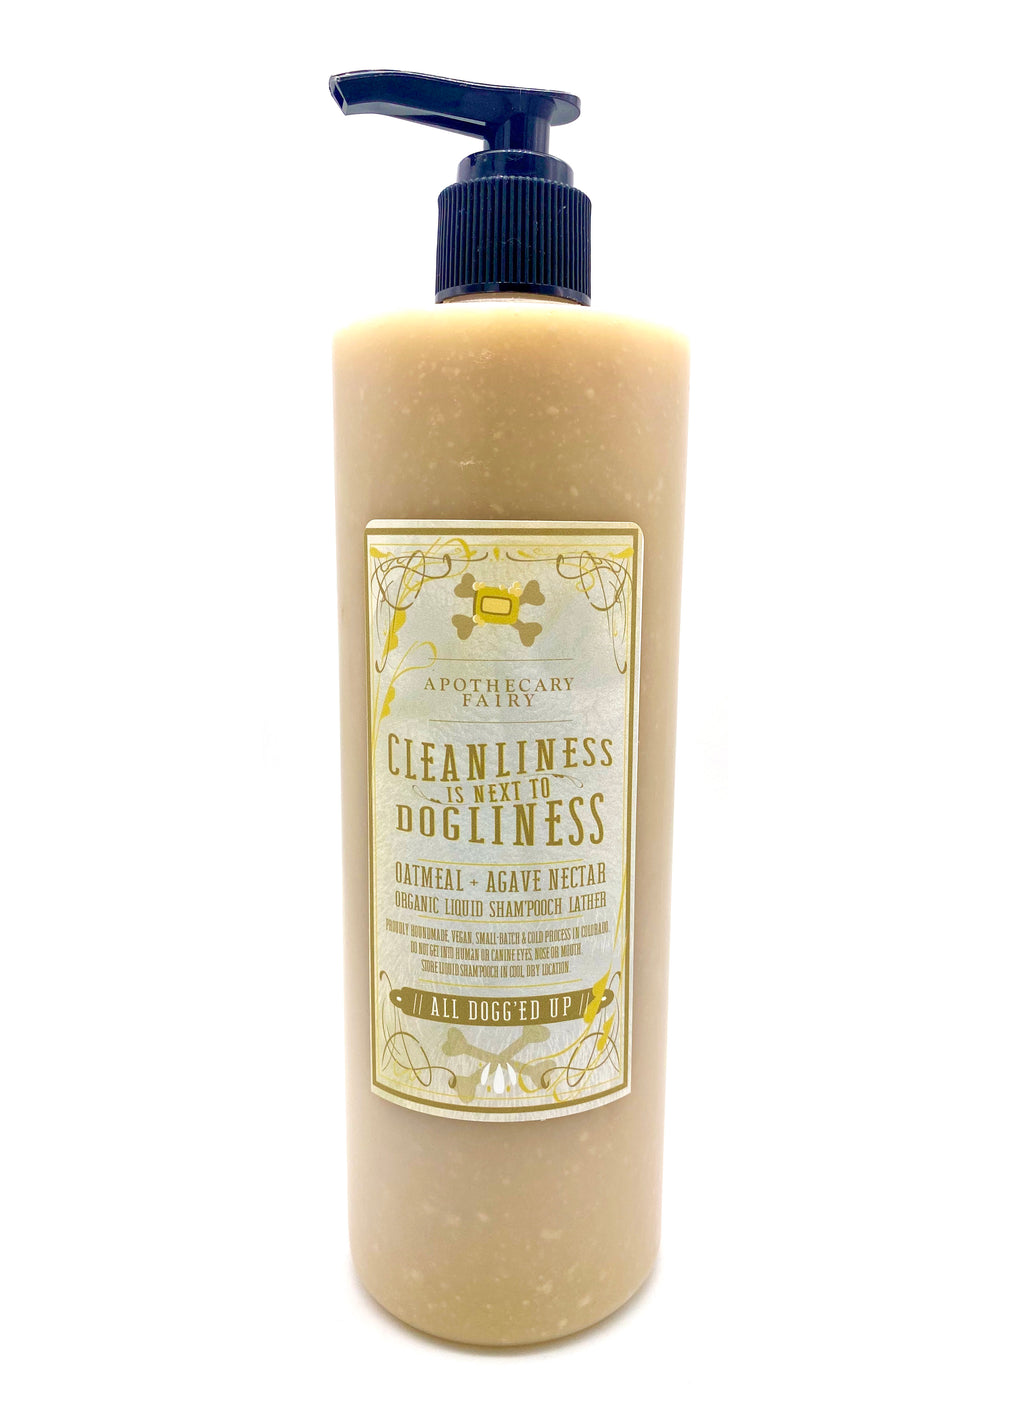 Cleanliness Is Next To Dogliness- All Dogg'ed Up Liquid Sham'pooch 16oz - The Apothecary Fairy